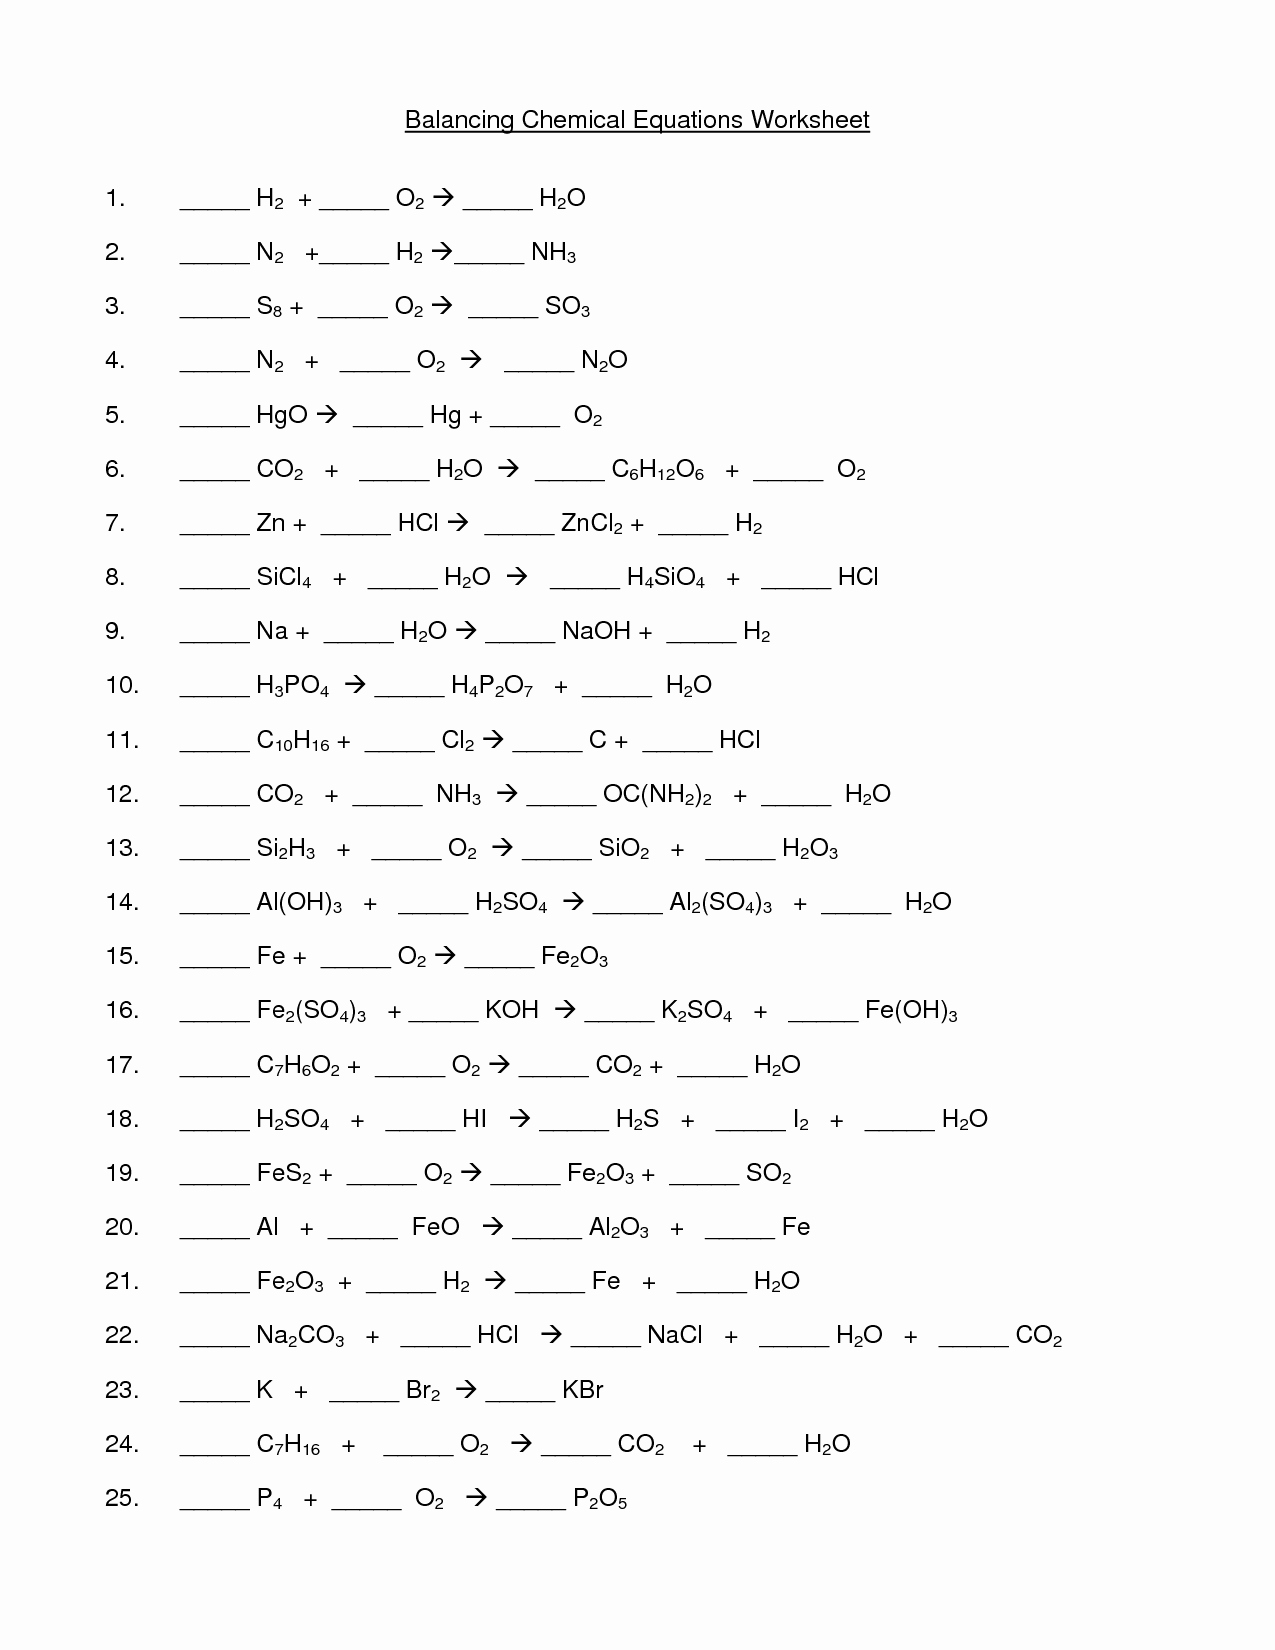 Worksheet Balancing Equations Answers Lovely 12 Best Of Balancing Chemical Equations Worksheet